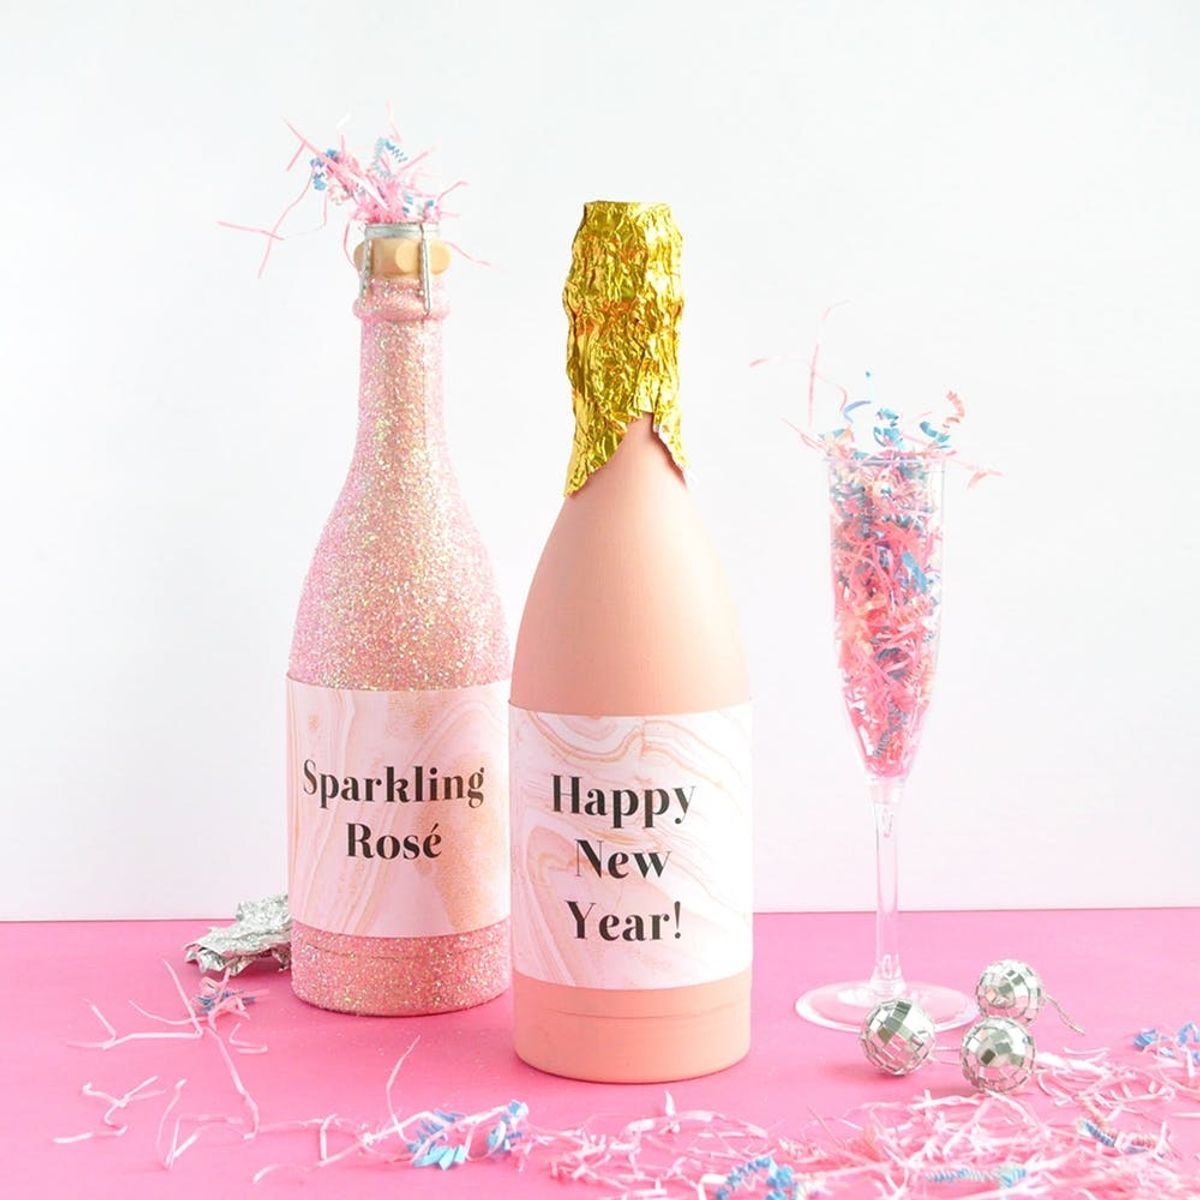 DIY These Sparkling Rosé Confetti Poppers for New Year’s Eve